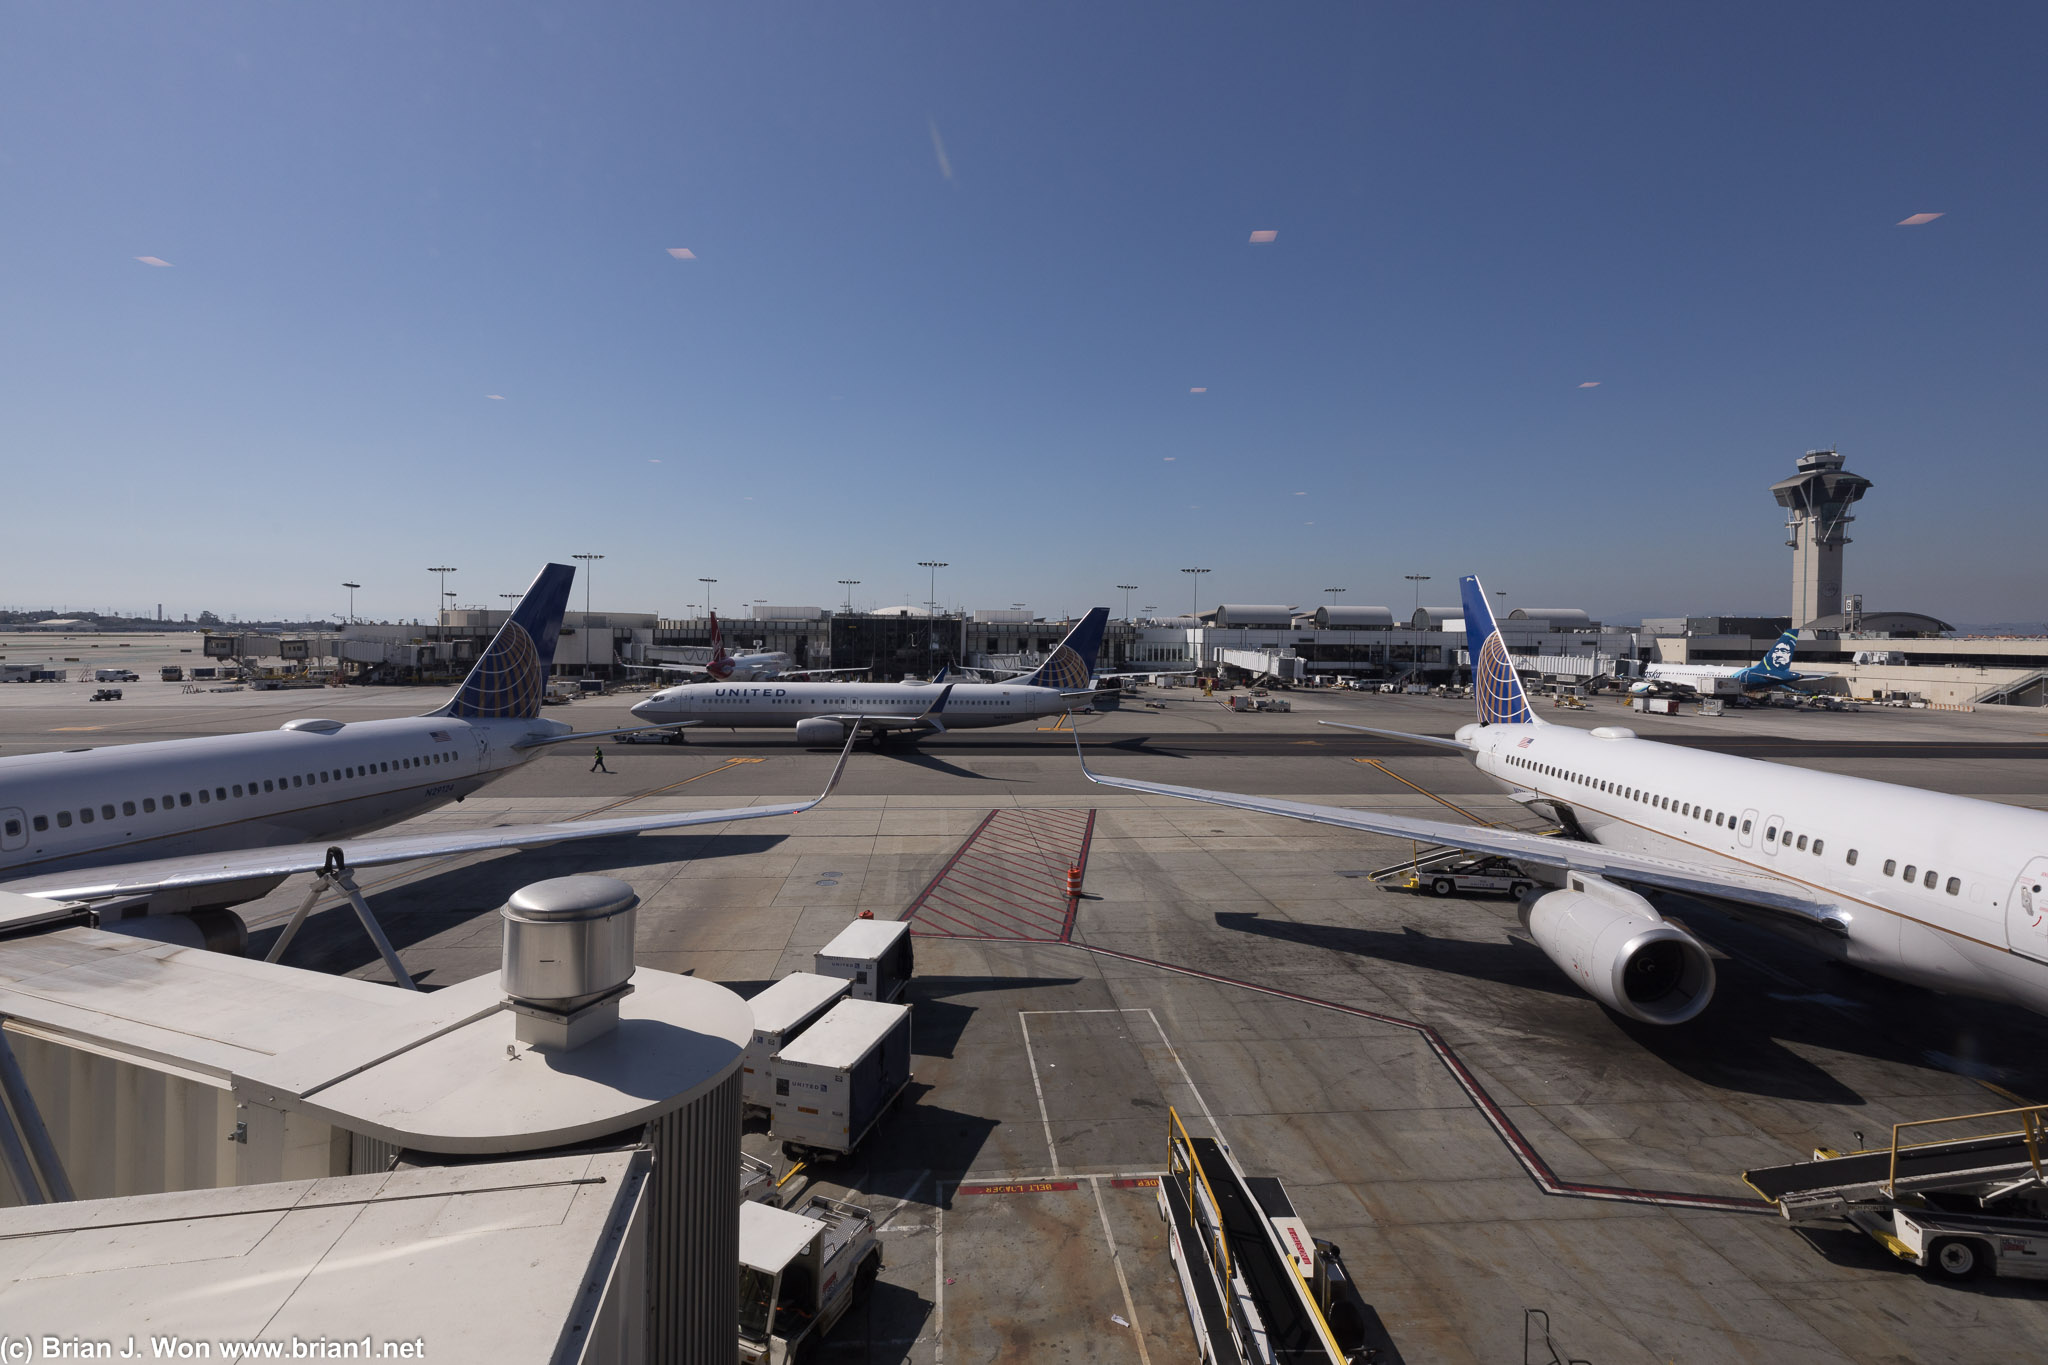 737's and 757's everywhere.